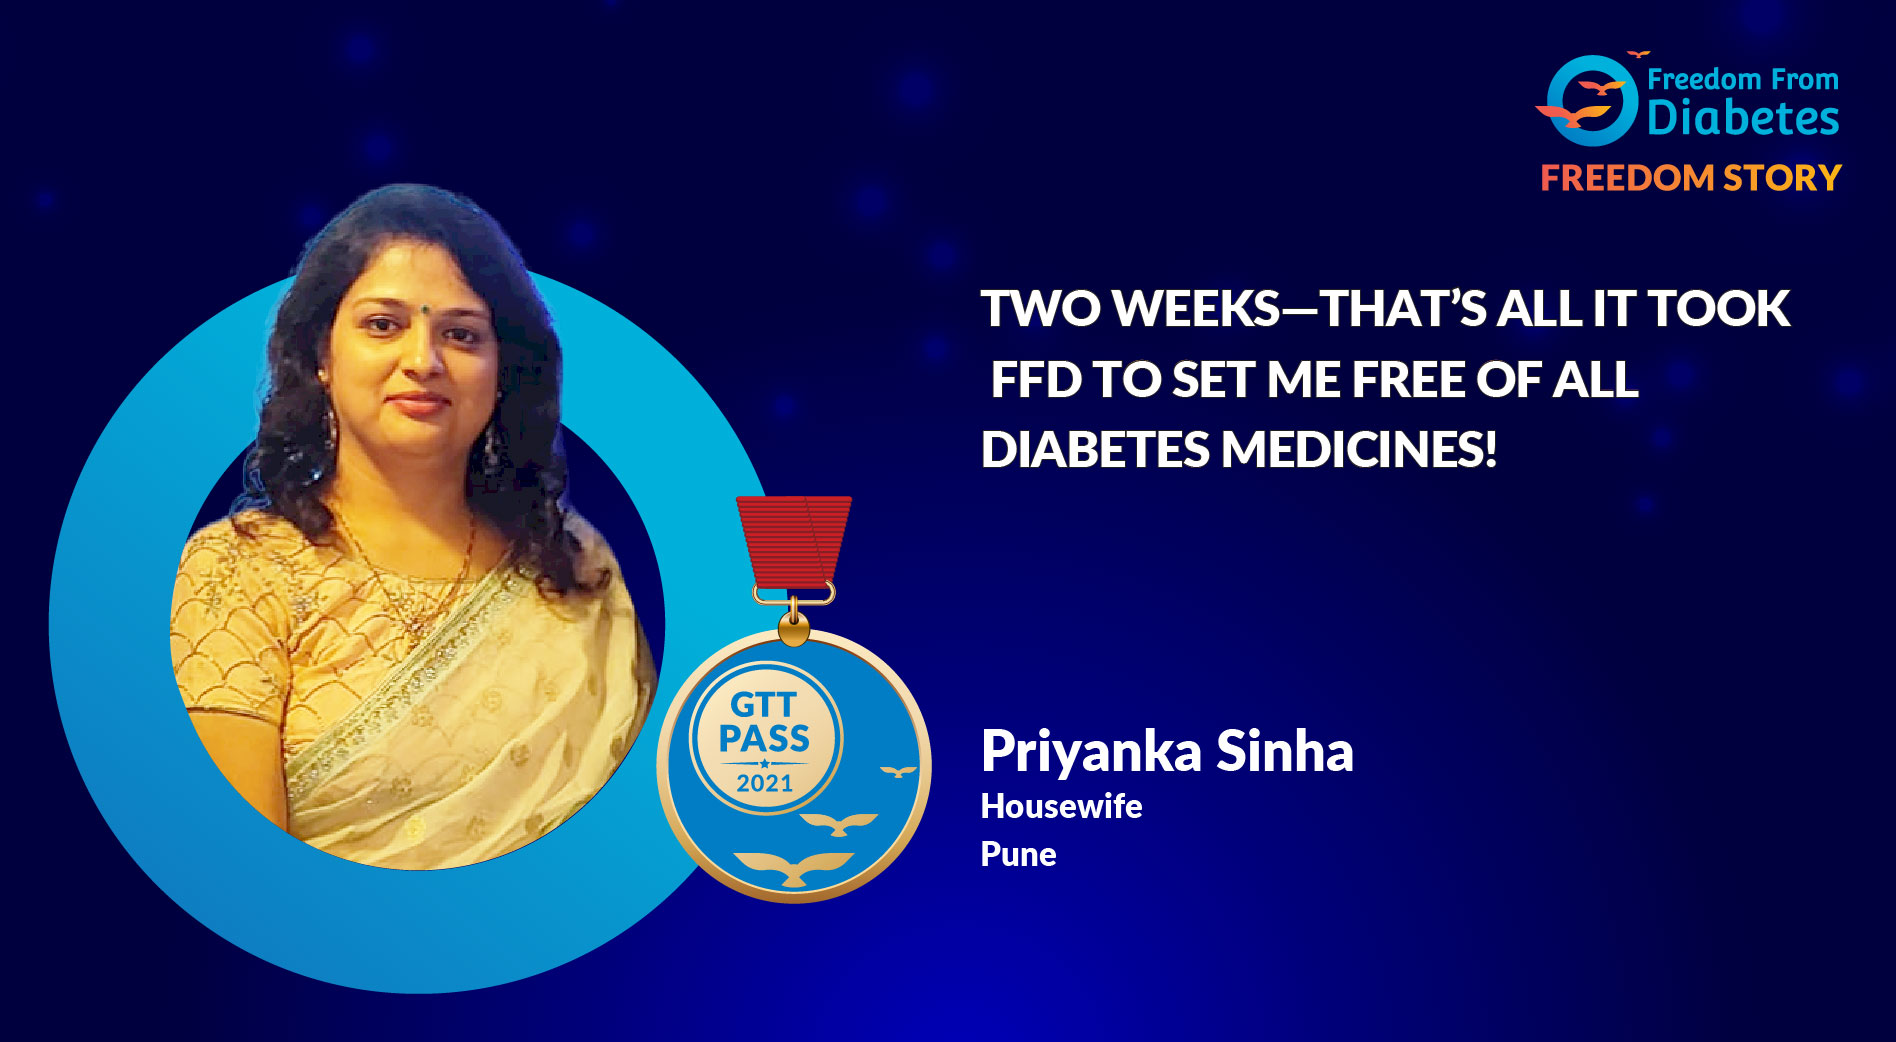 Two weeks—that’s all it took FFD to set me free of all diabetes medicines!